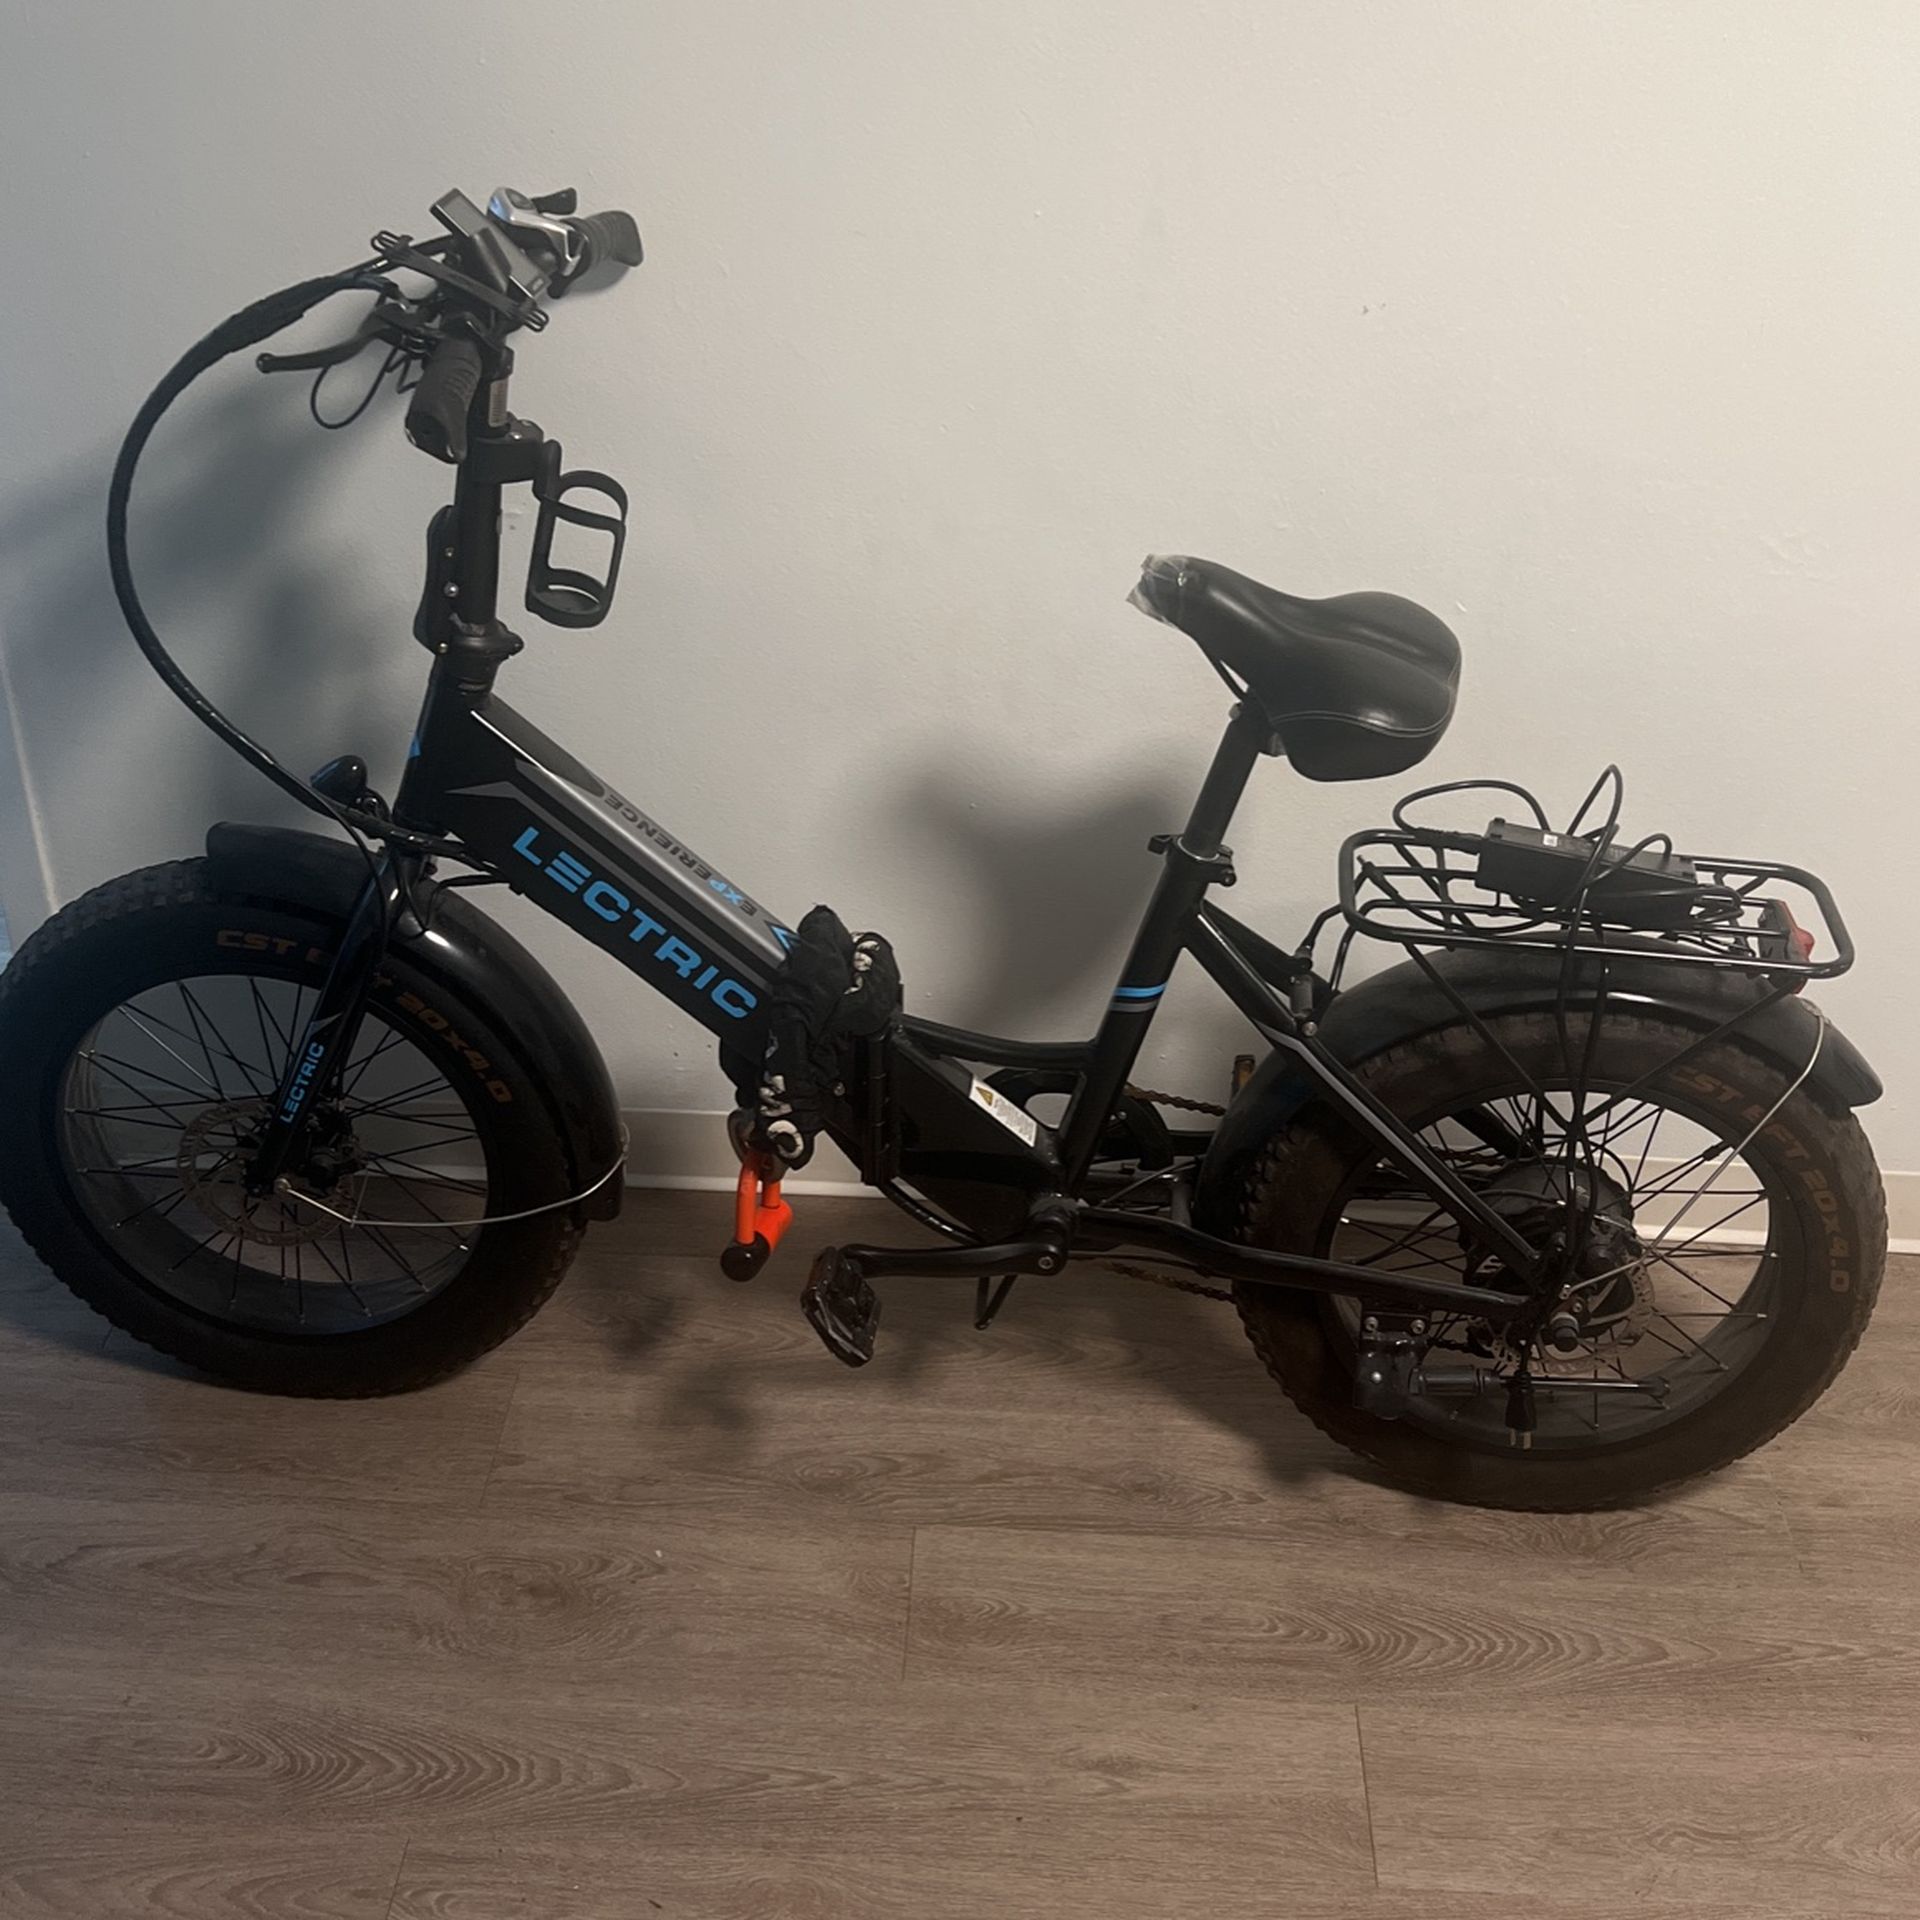 E-bike For Sale Comes With Heavy Duty Bike Lock, Plus Accessories And All Keys